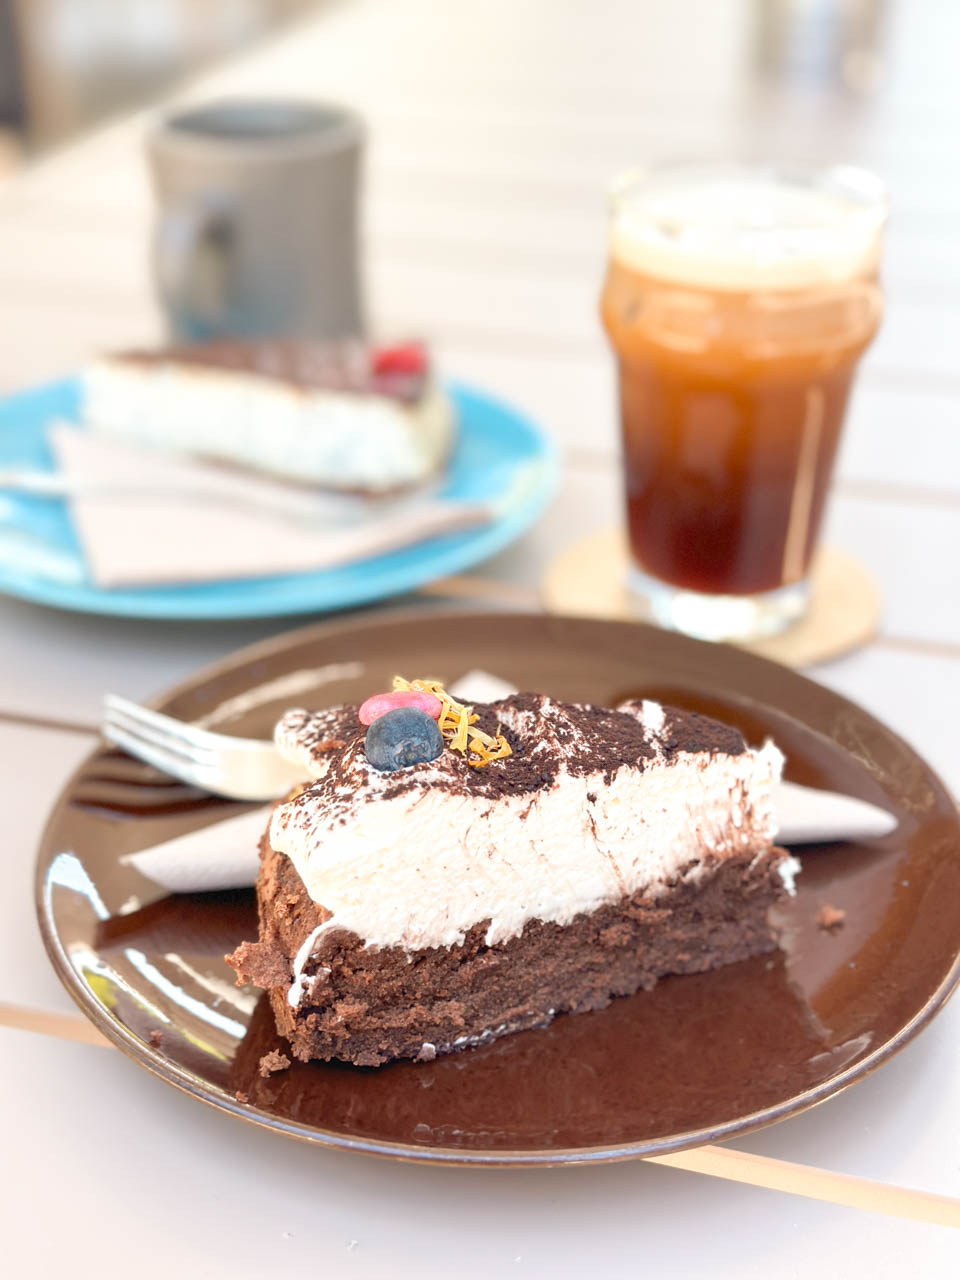 A close-up of a chocolate cake slice with whipped cream, cocoa powder, and a blueberry topping next to a glass of nitro coffee